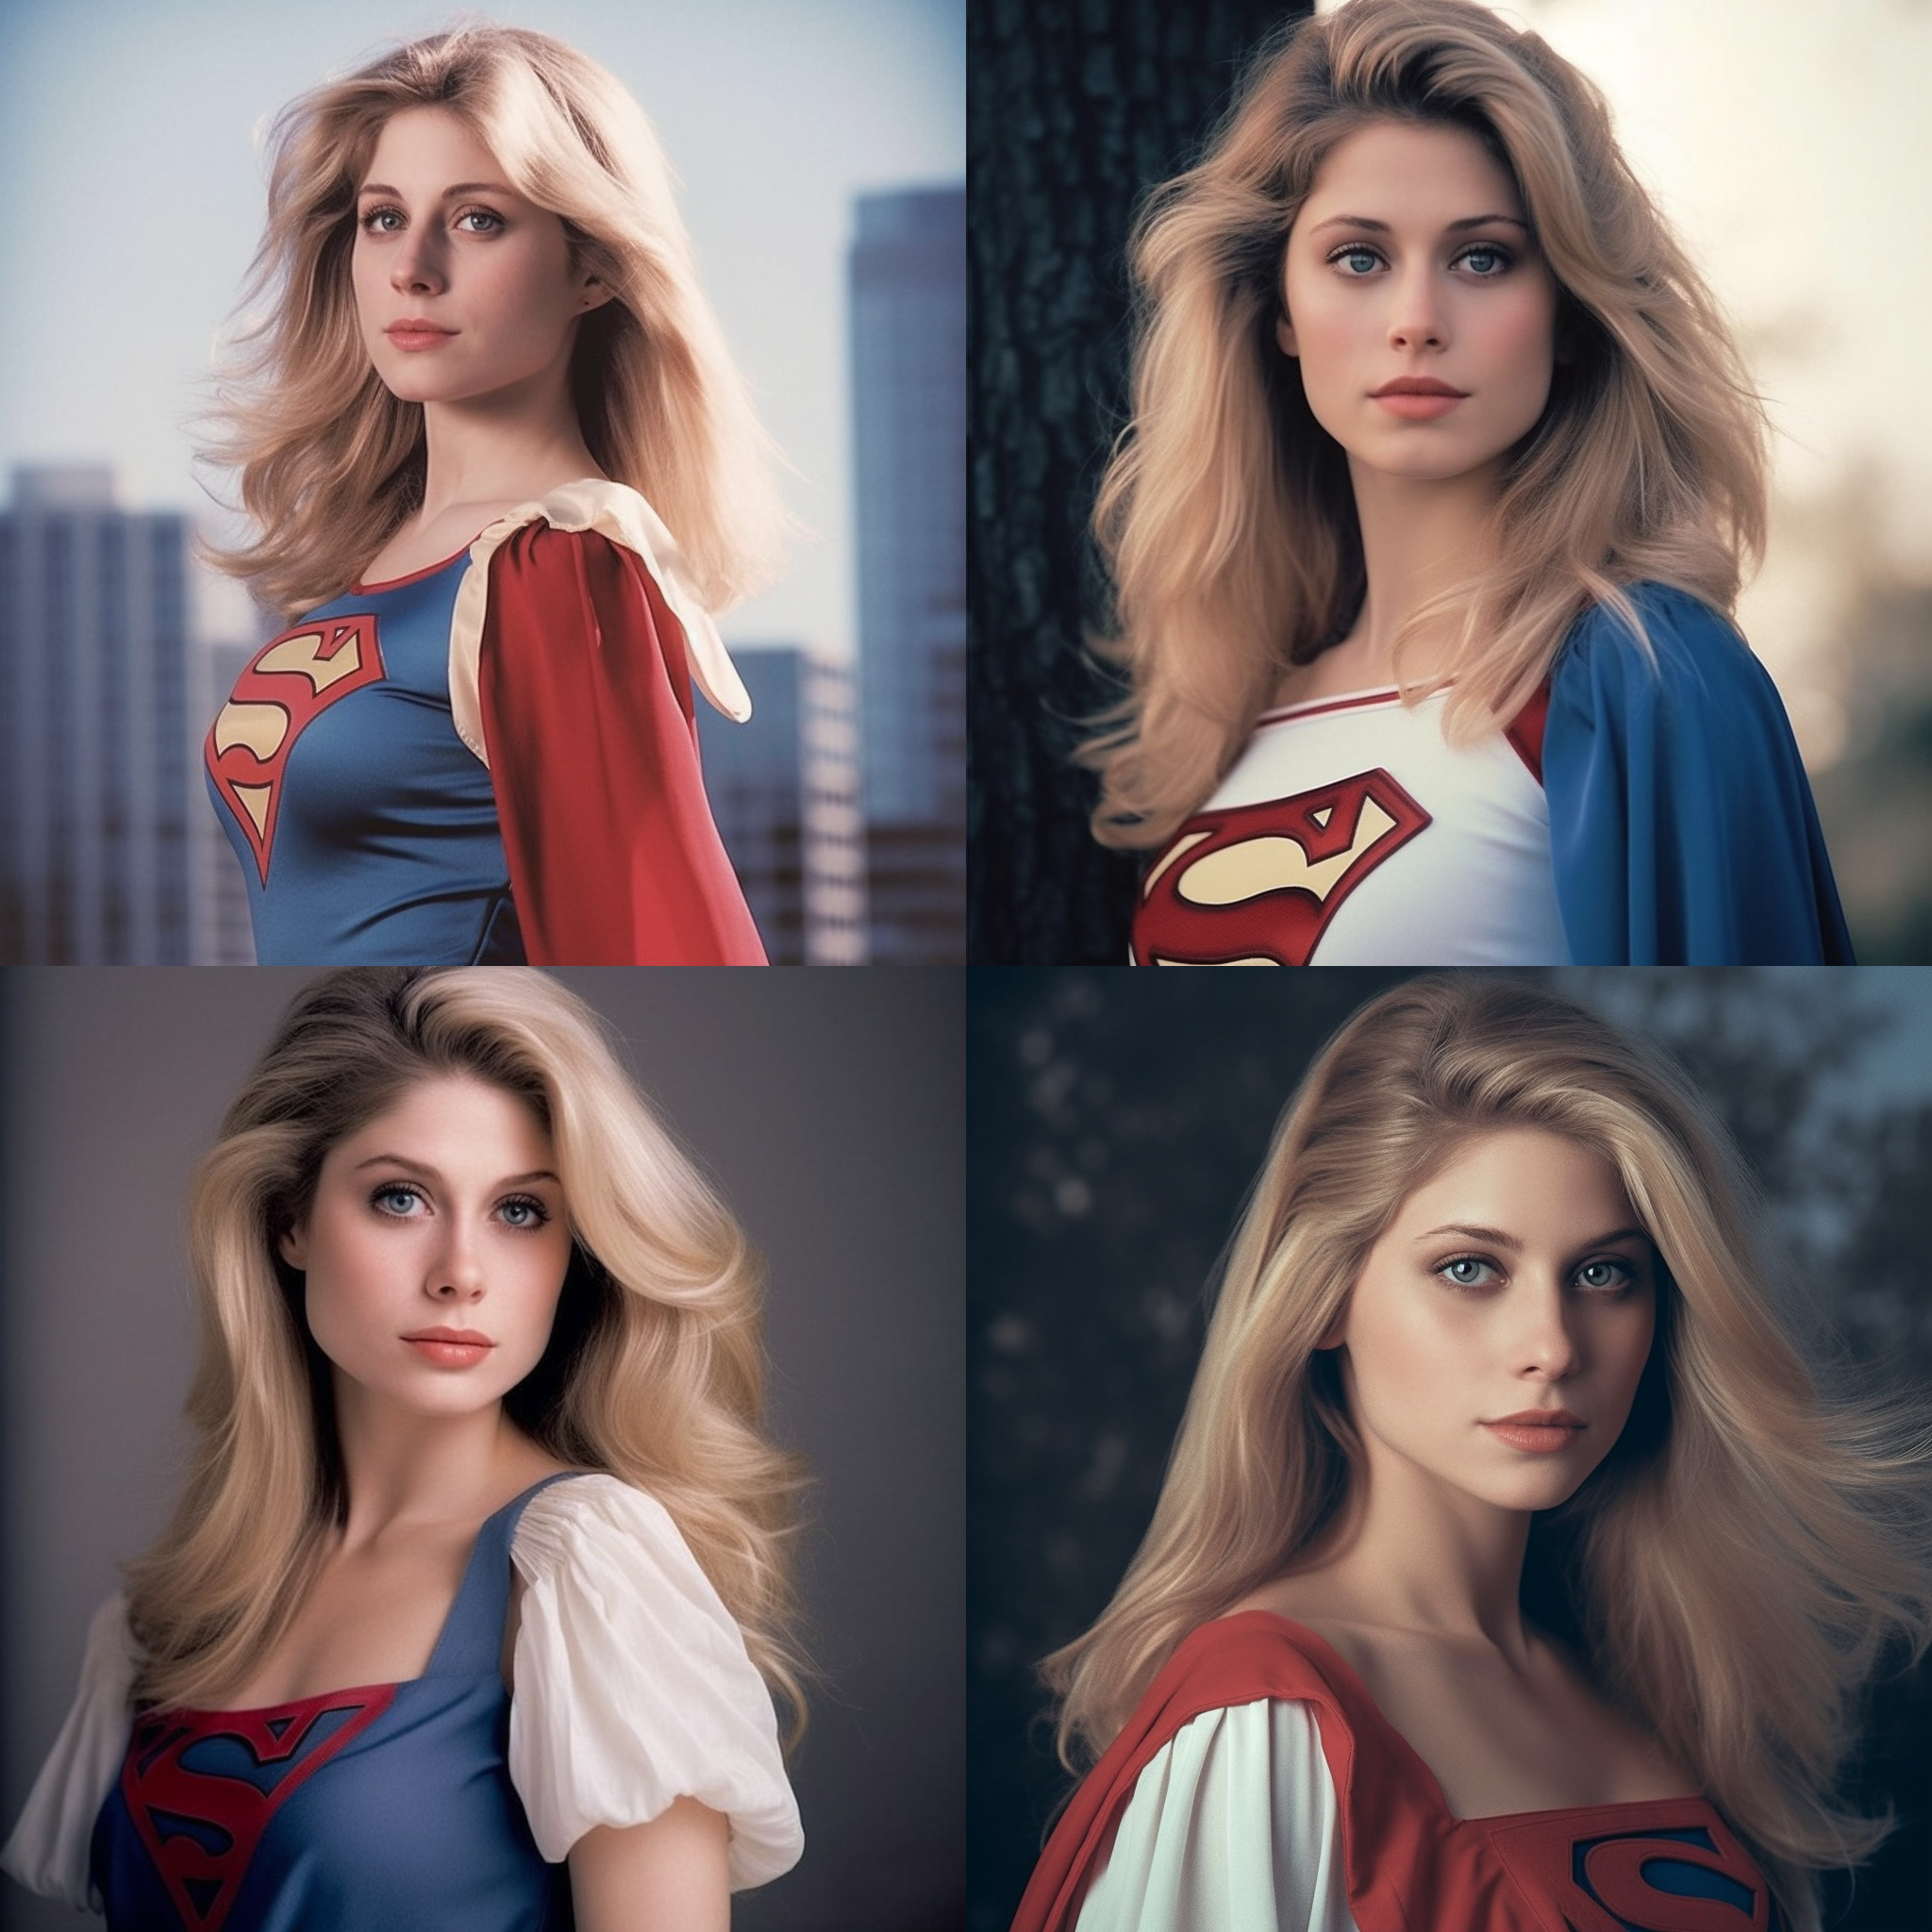 Sir_Frogdick_dressed_as_Supergirl_5071992d-871d-460e-ac8d-dfbfe97e07cc.png